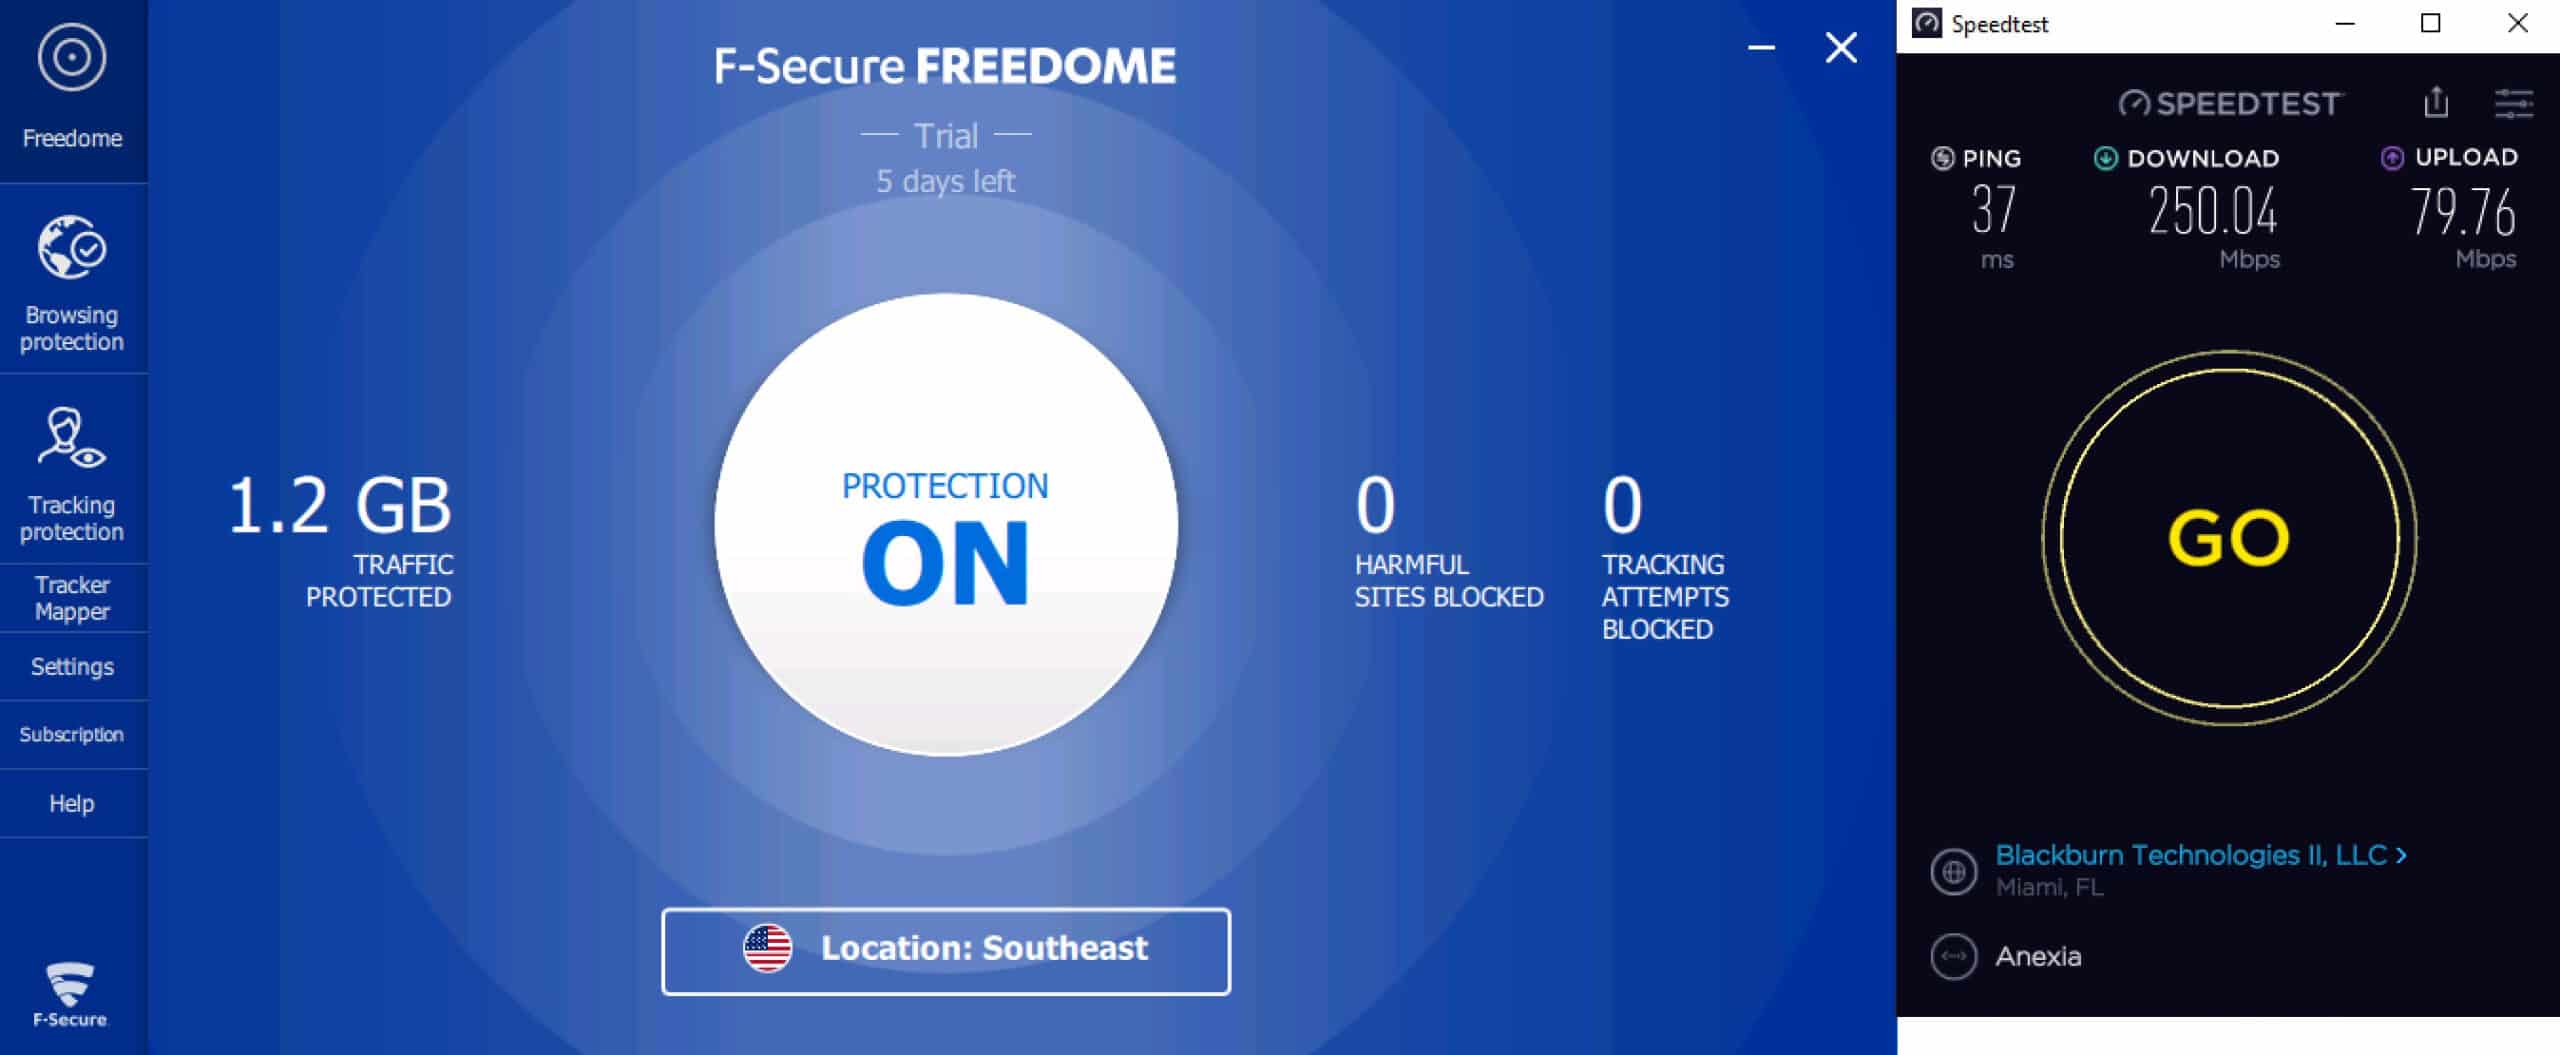 Freedome - Speed Test